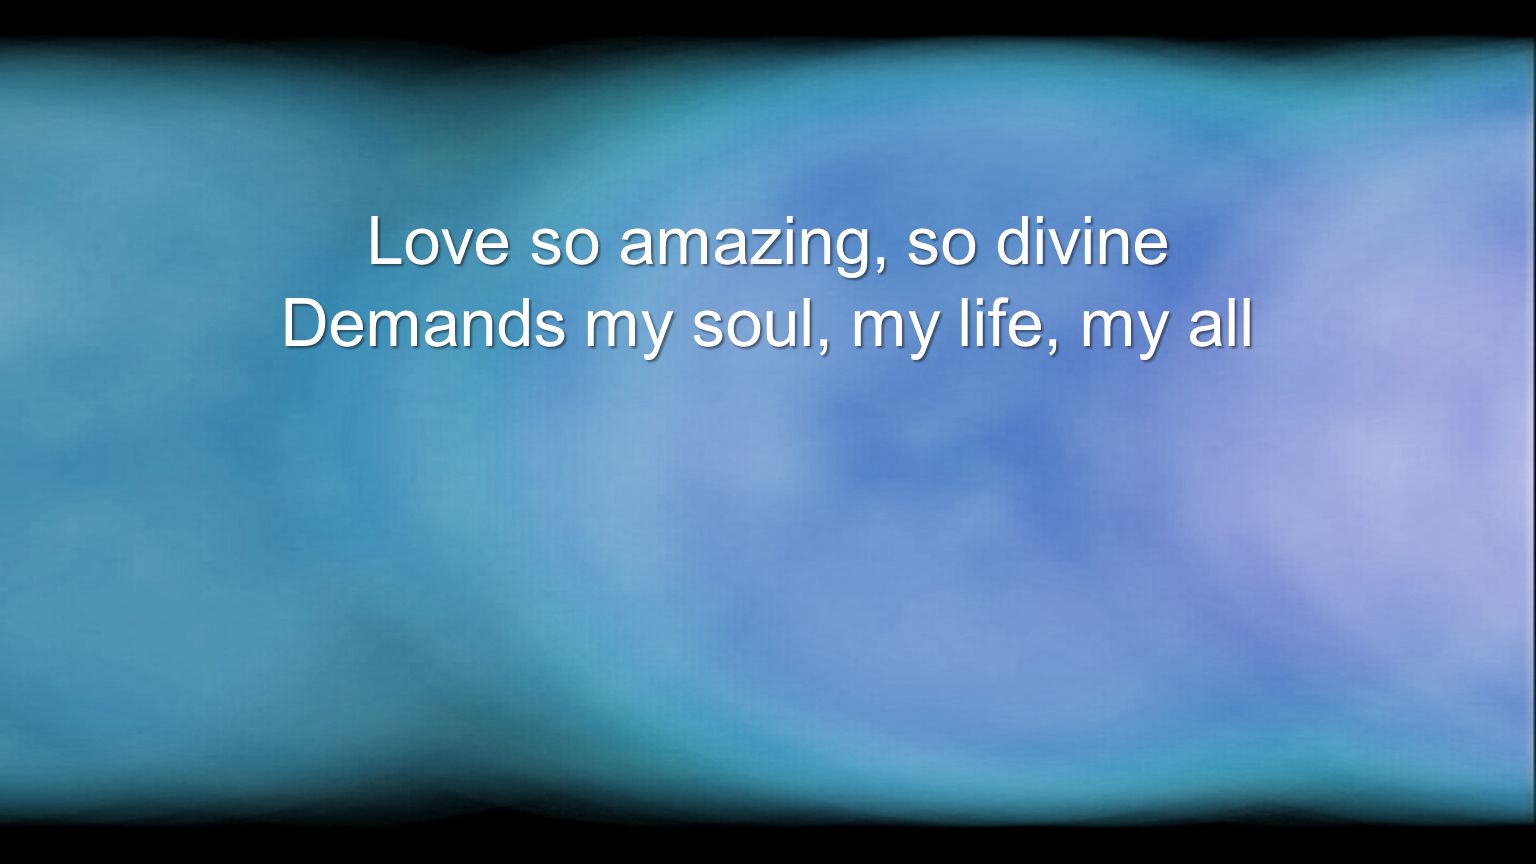 Love so amazing, so divine Demands my soul, my life, my all